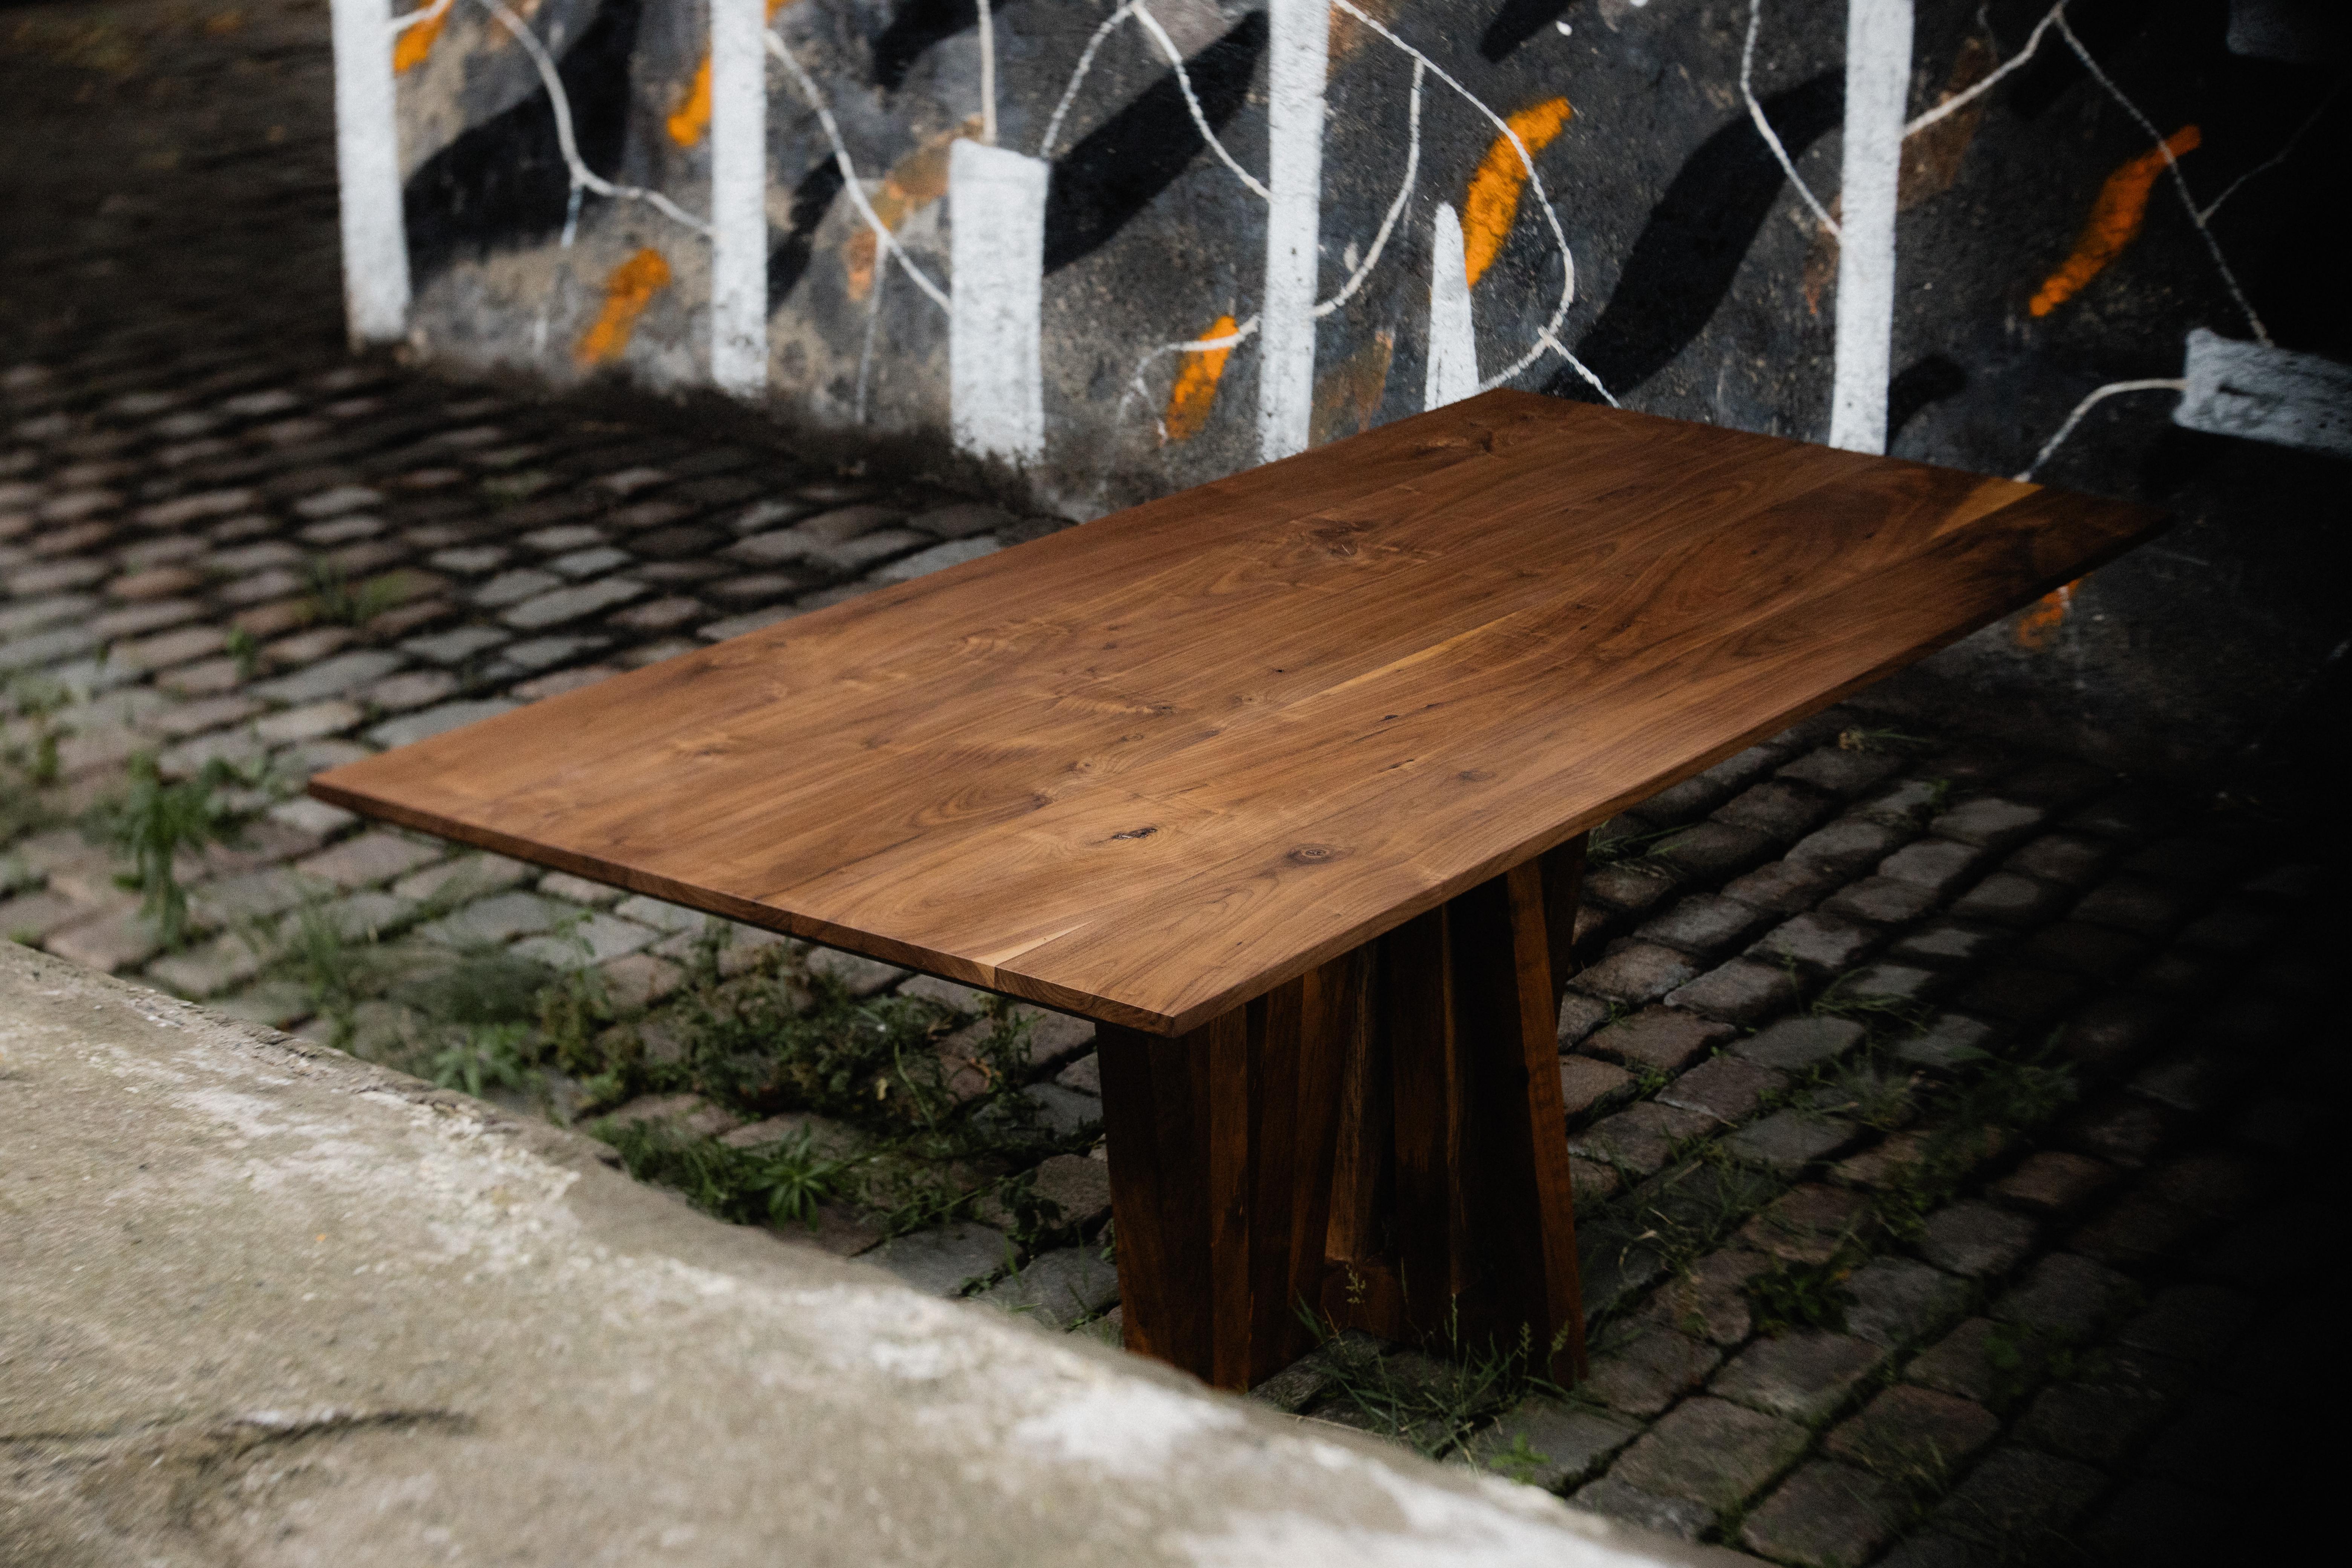 The Imani Dining table carries the signature of Albert Potgieter Designs, but displays it in a bold way, taking a step into the Sculptural Furniture world. 

The dining table is made out of hard wood. The sculptural leg is the essence of the piece